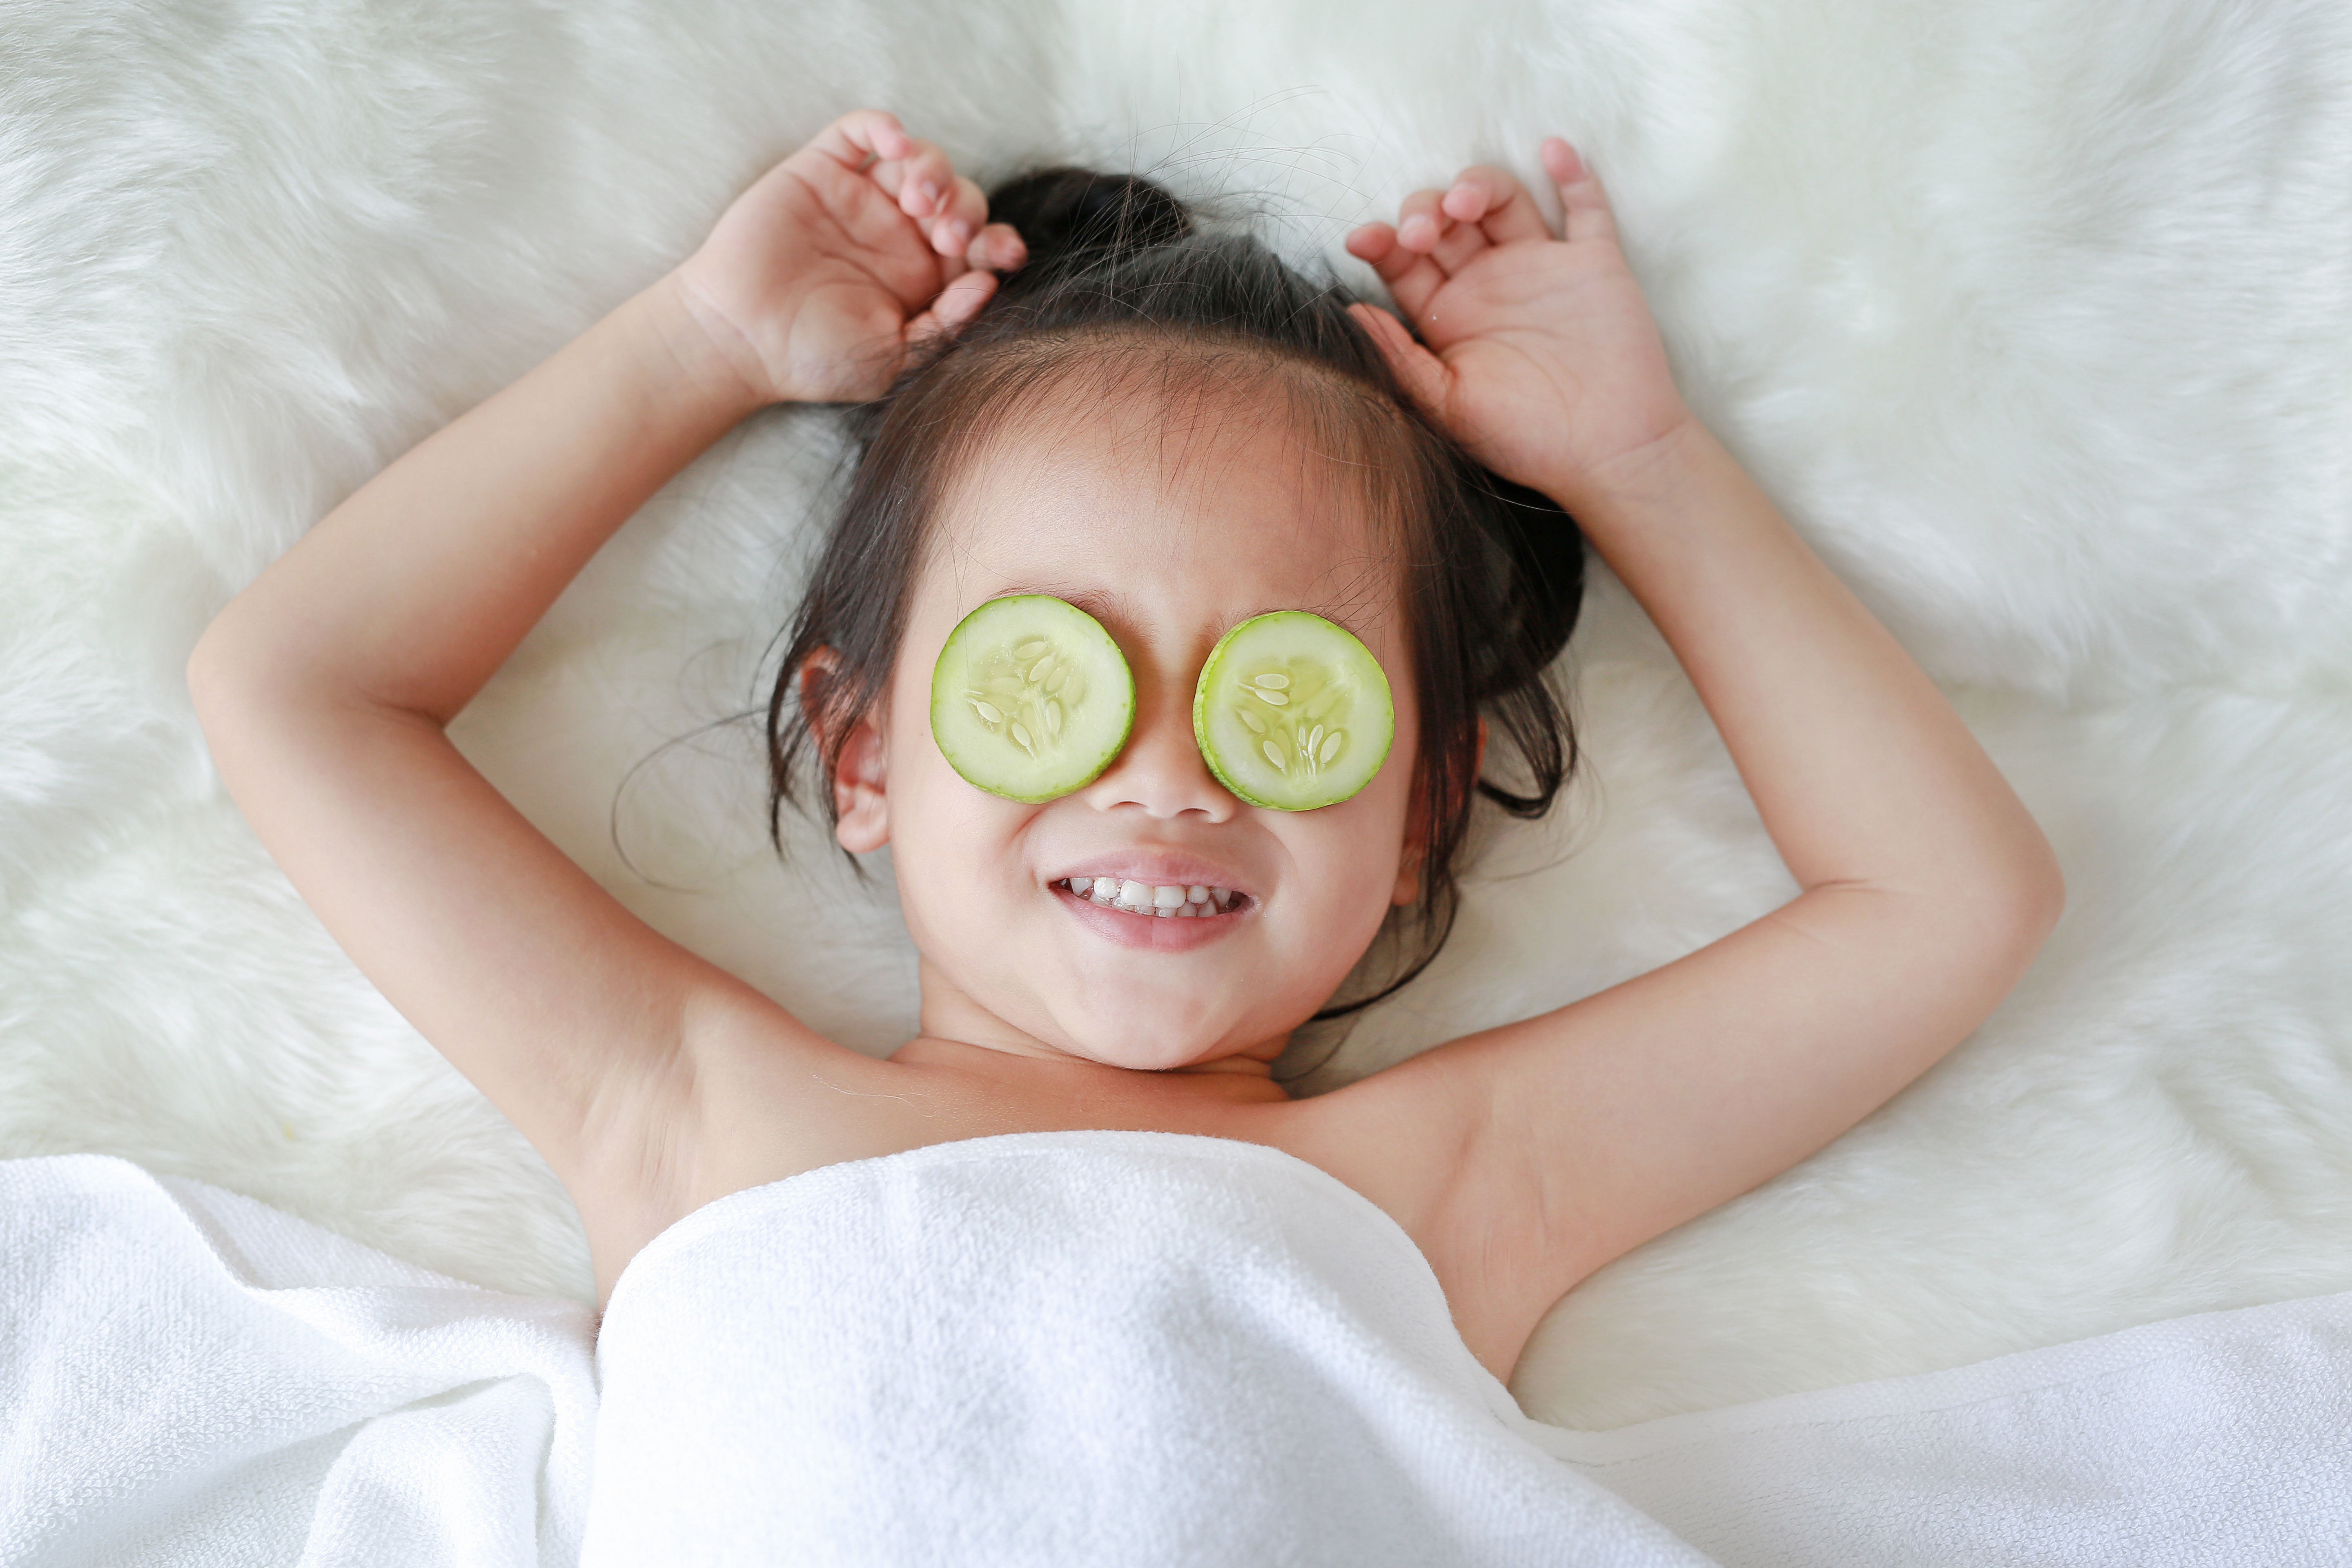 Baby with cucumber slices on eyes for rest and nourishment